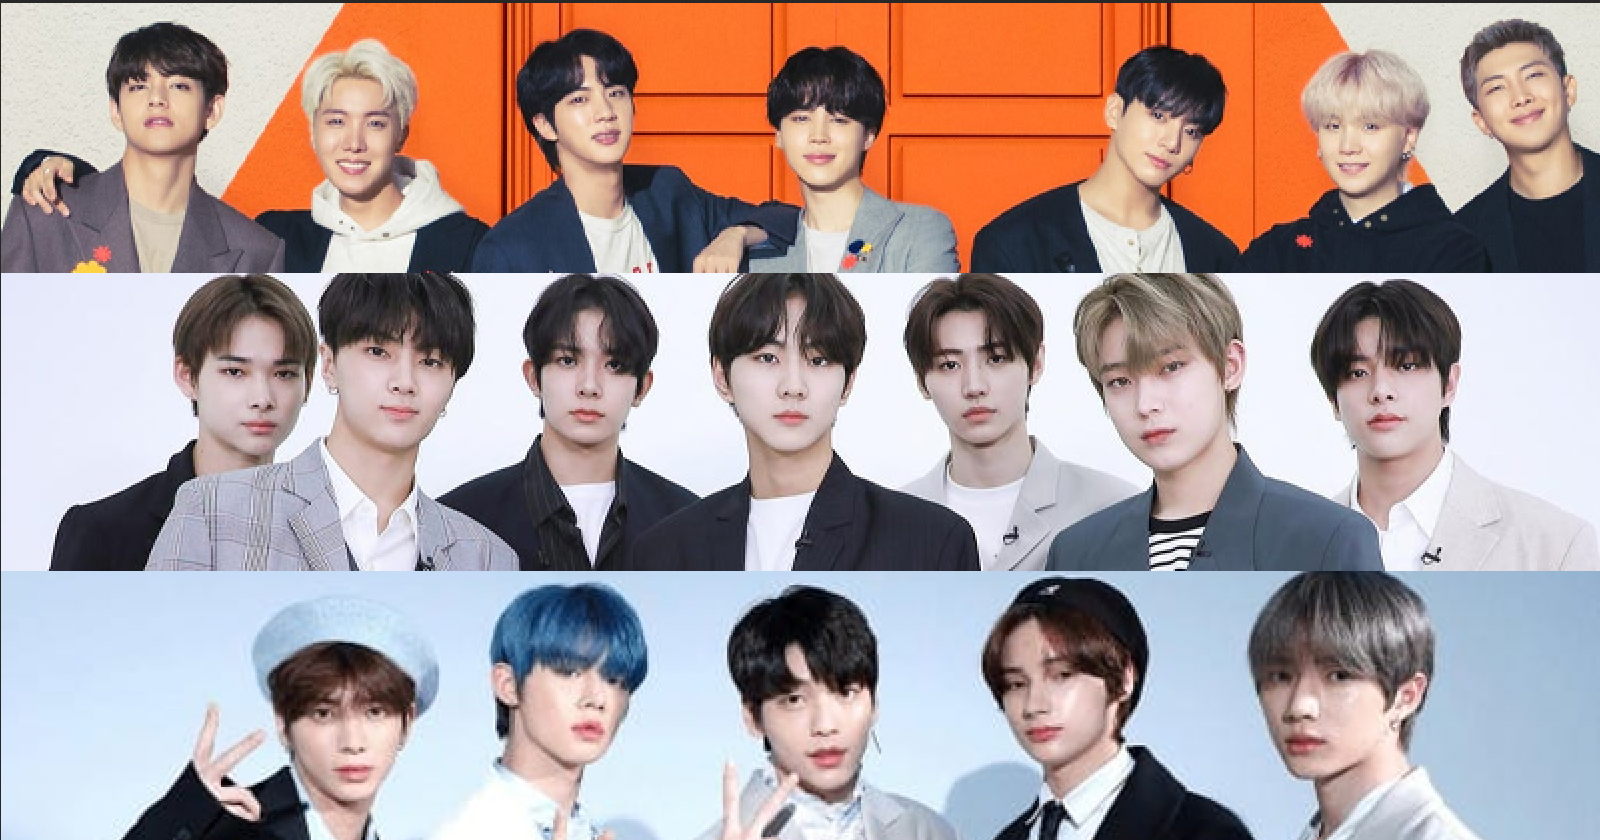 HYBE Teams Up with Webtoon and Wattpad to Release Original BTS, TXT and ENHYPEN Webcomics and Webnovels